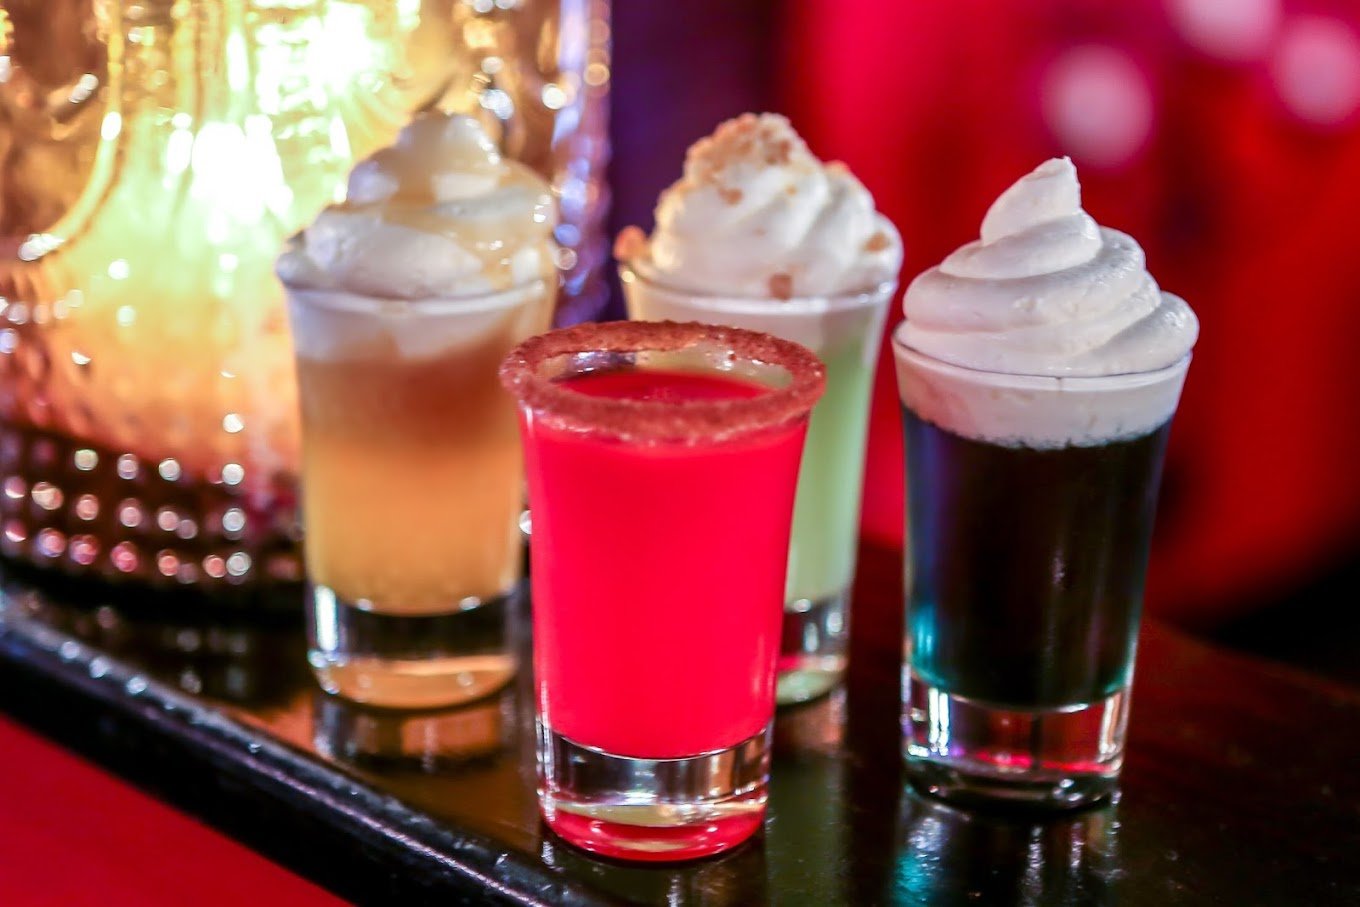 Four fun drinks, three with whipped topping